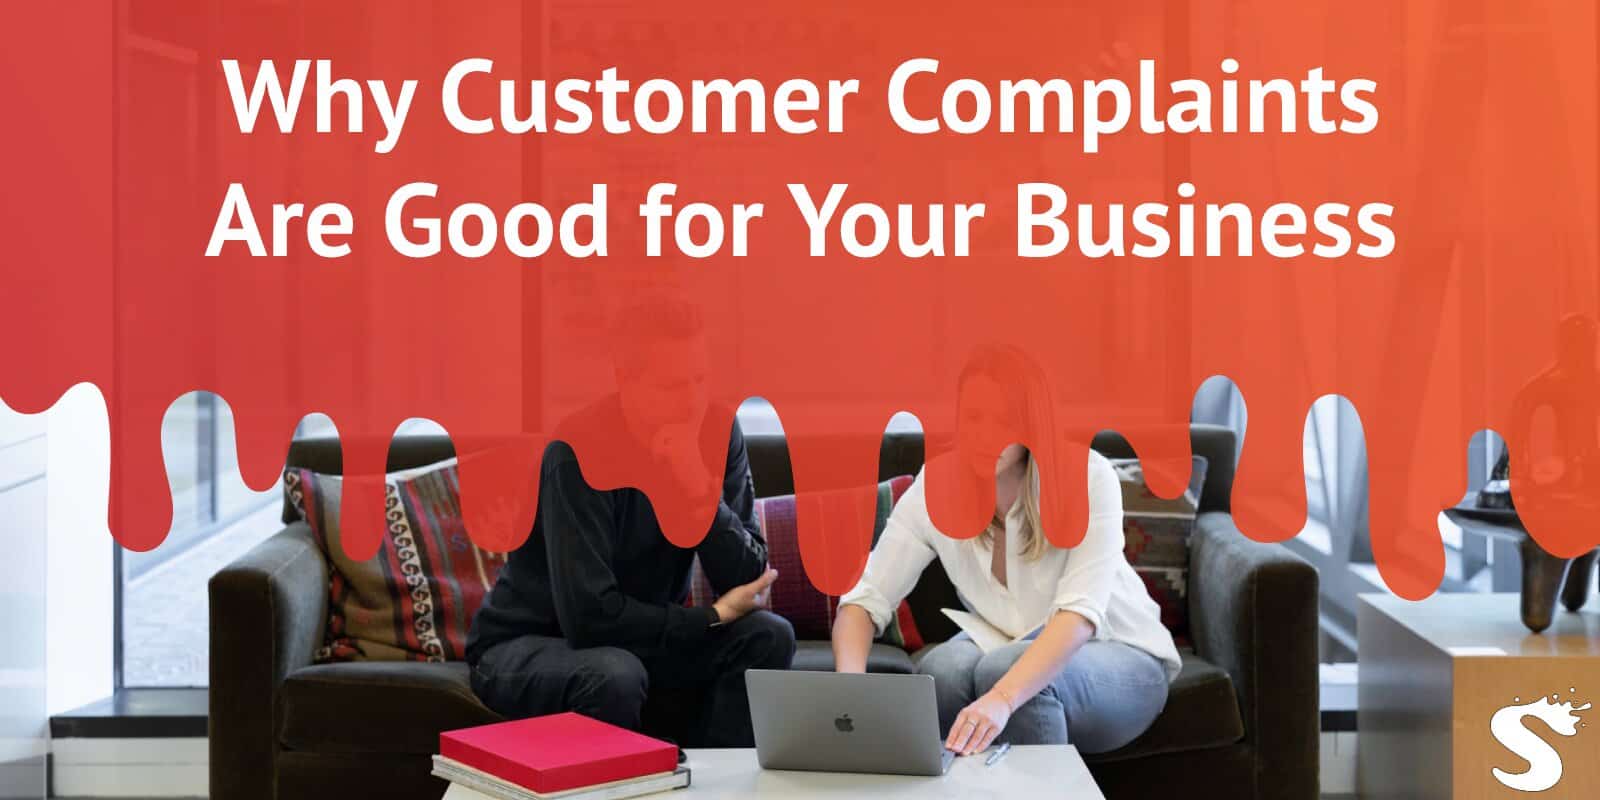 Why Customer Complaints Are Good for Your Business